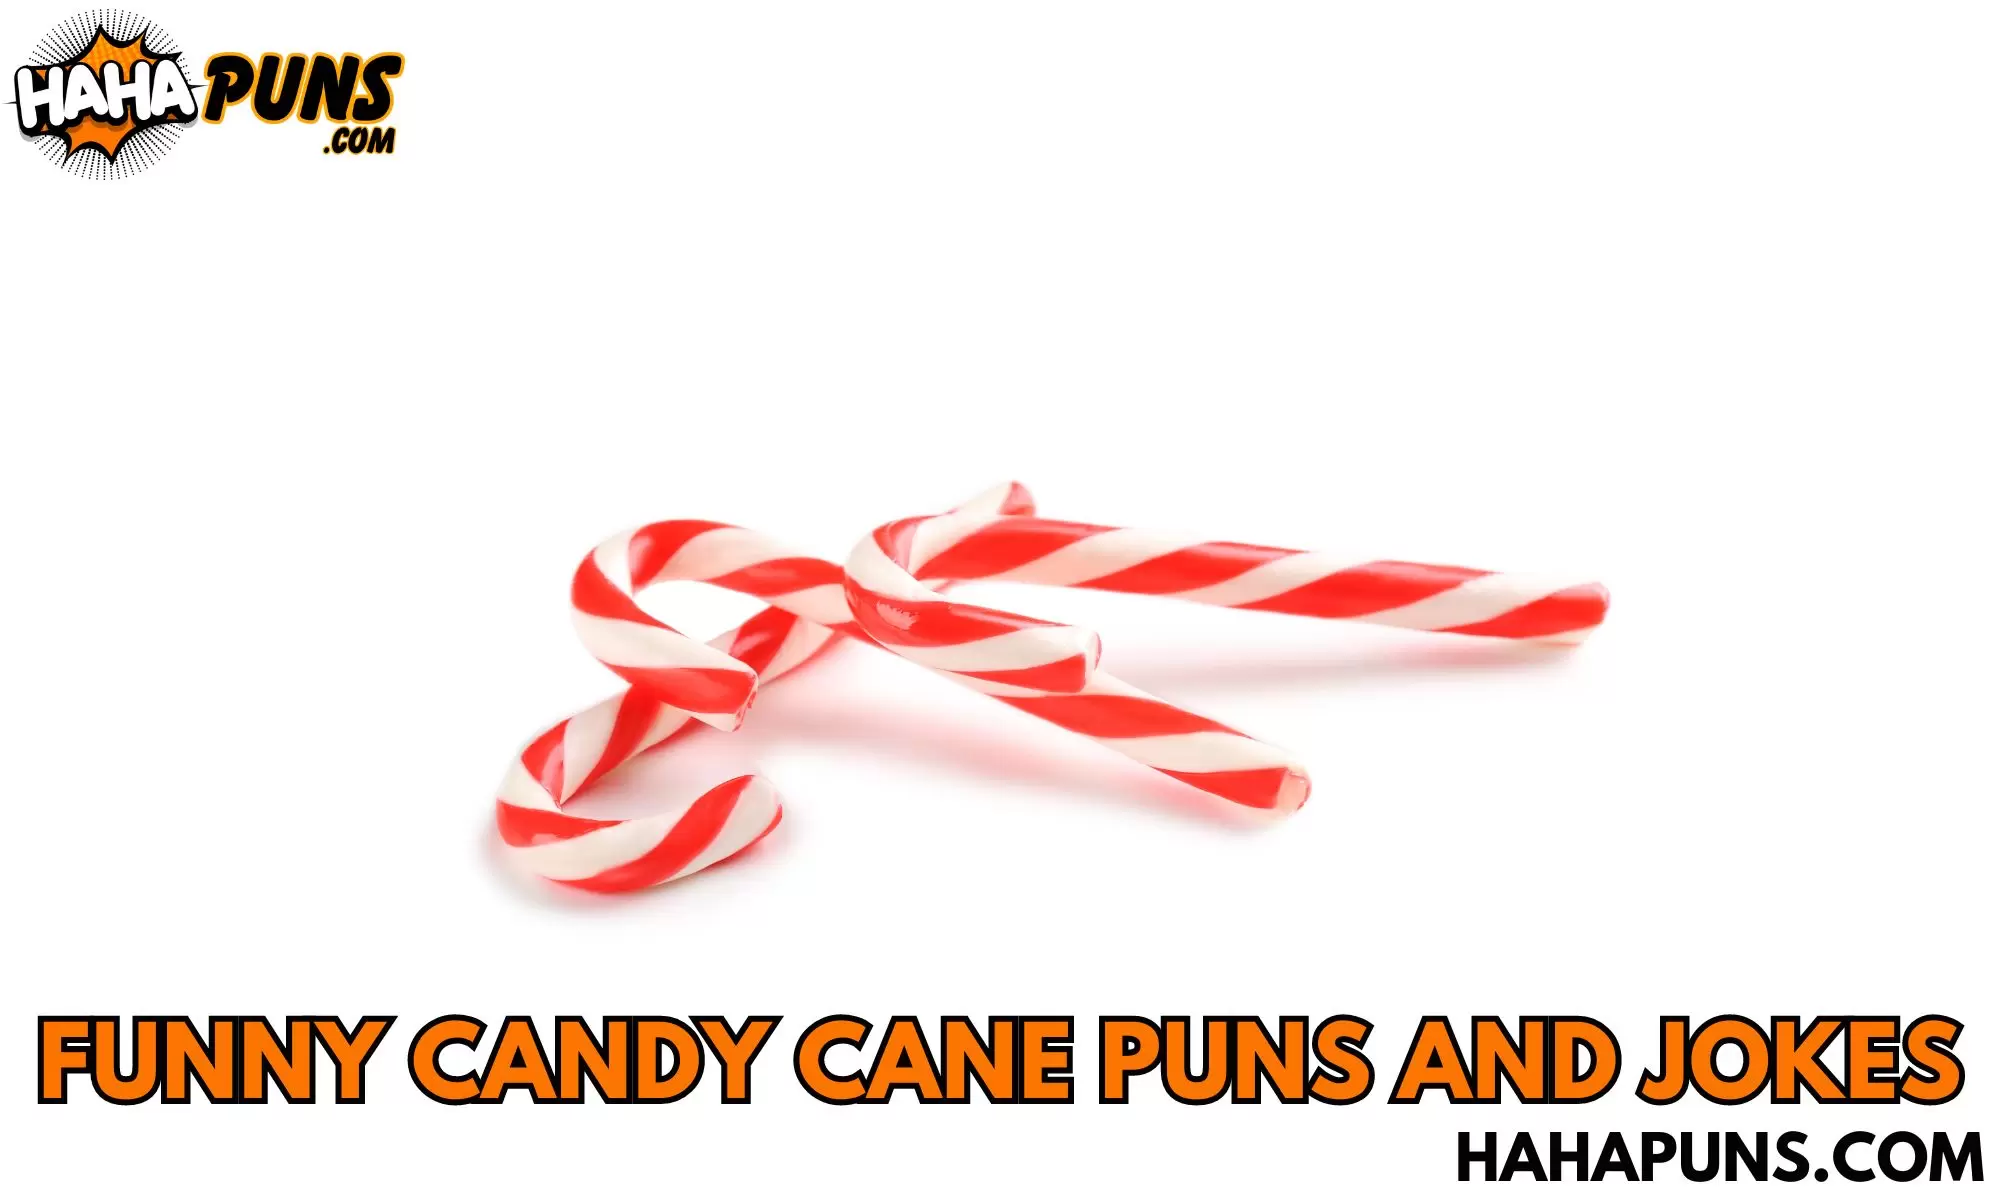 Funny Candy Cane Puns and Jokes